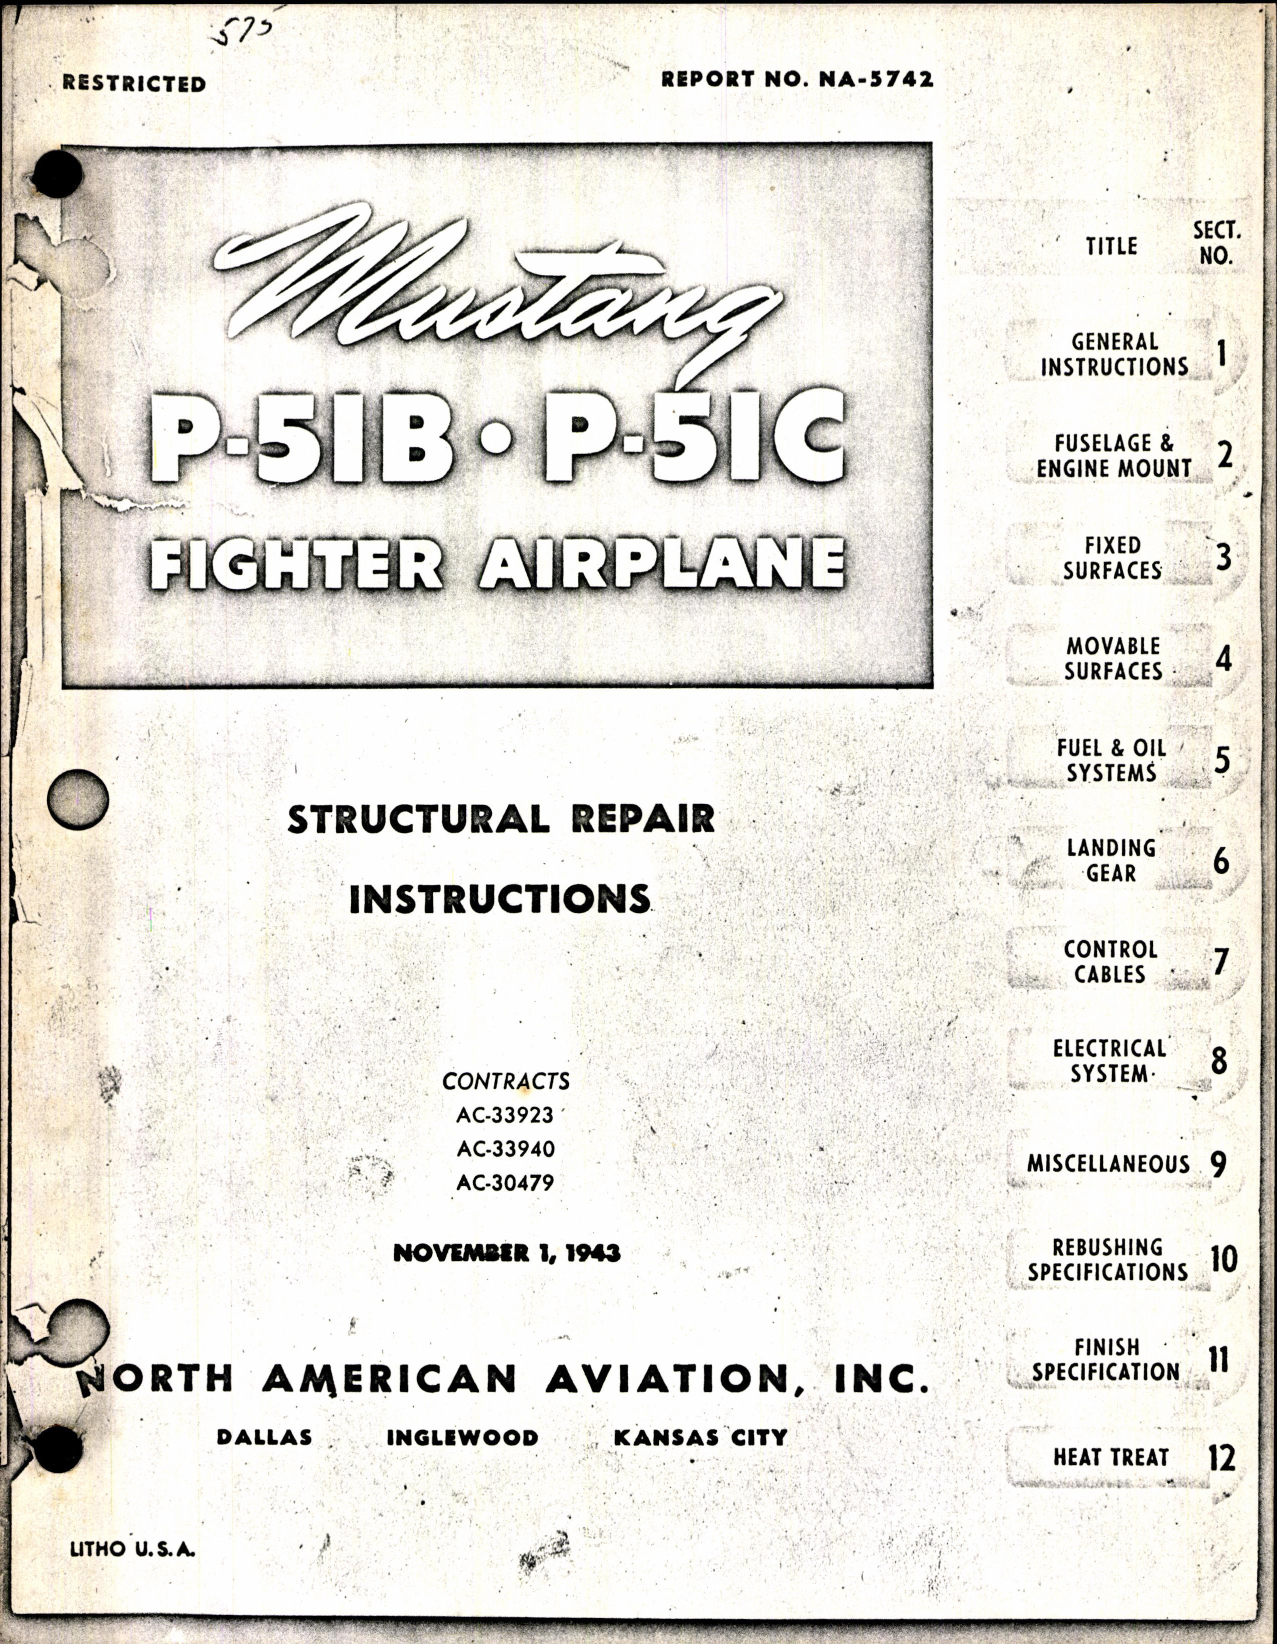 Sample page 1 from AirCorps Library document: Structural Repair Instructions for P-51B and P-51C